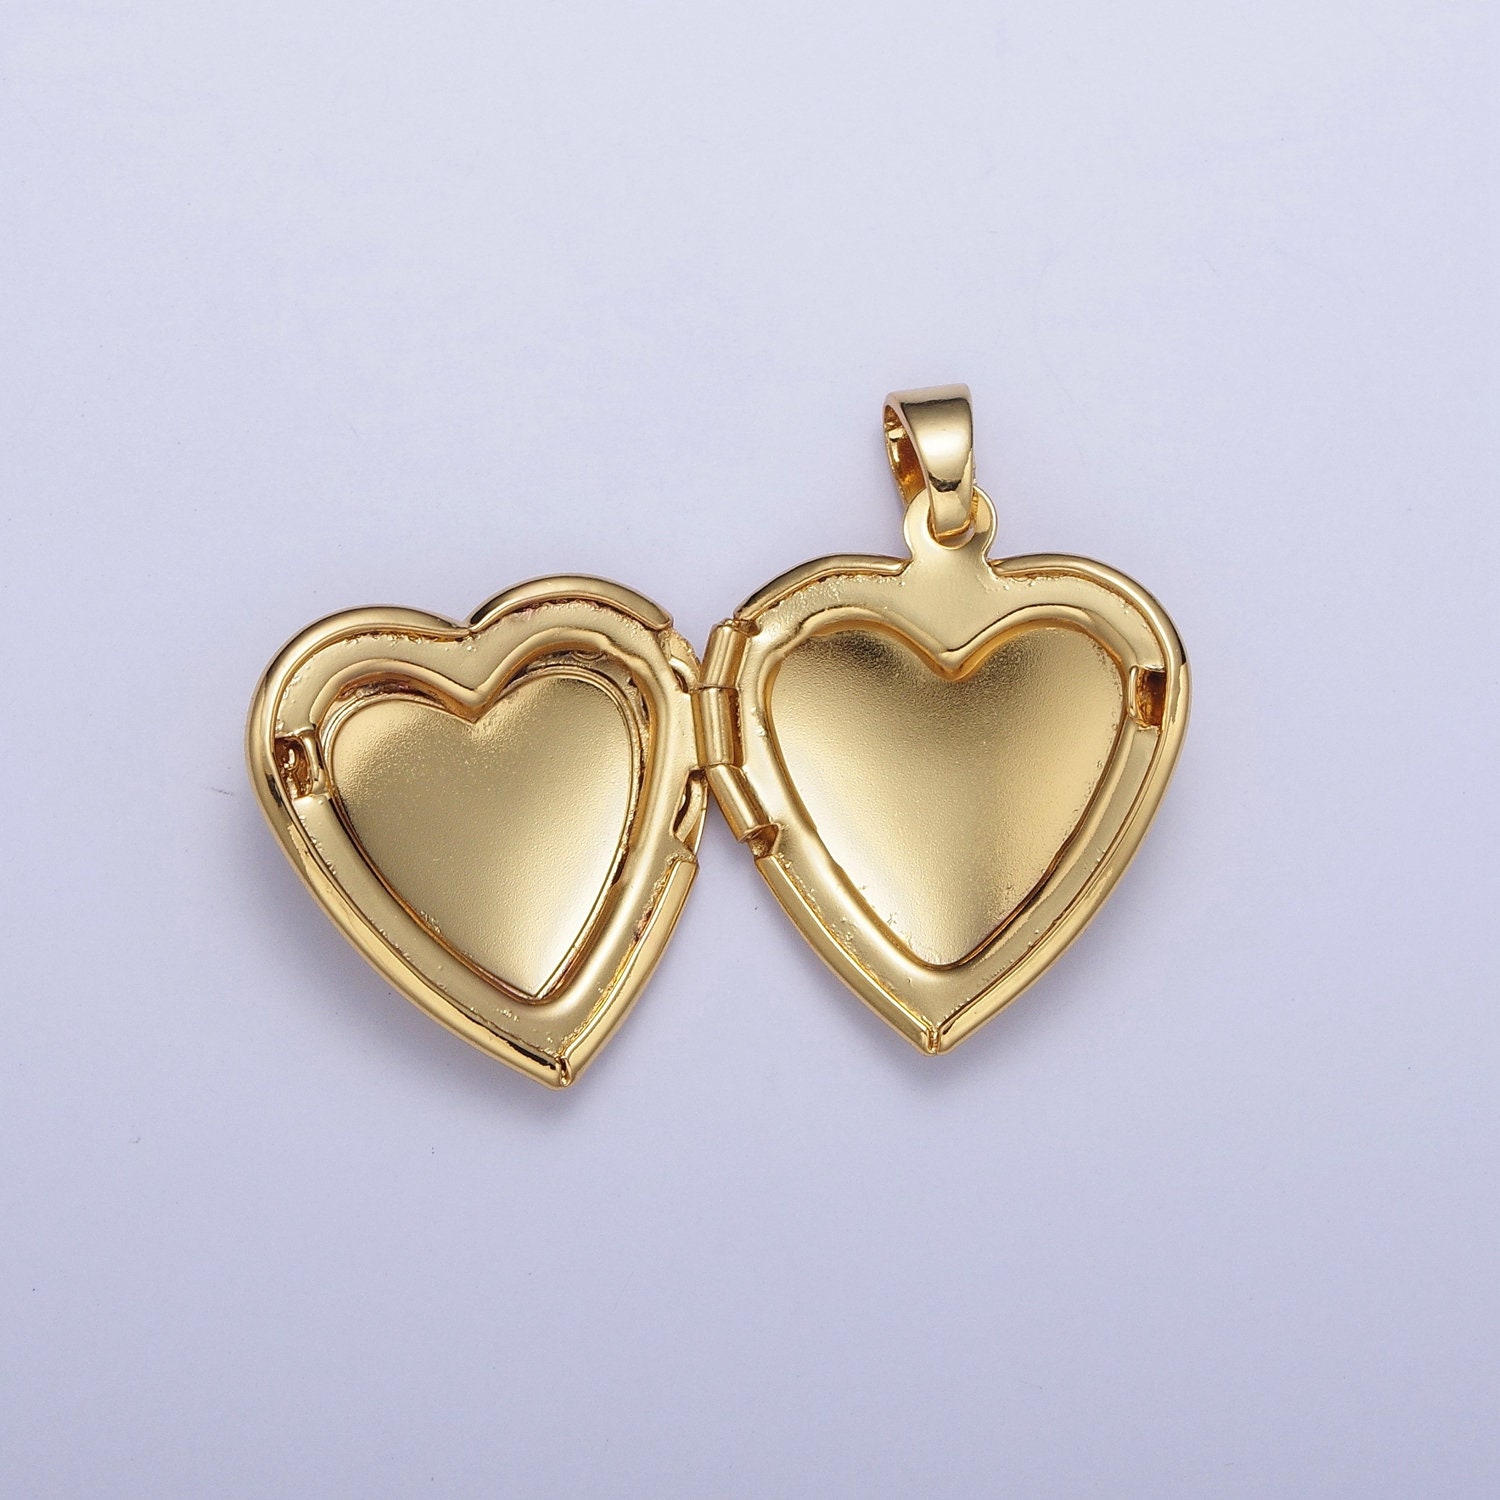 LIFETIME JEWELRY Two Hearts Locket Necklace That Holds Pictures 24k Gold Plated 